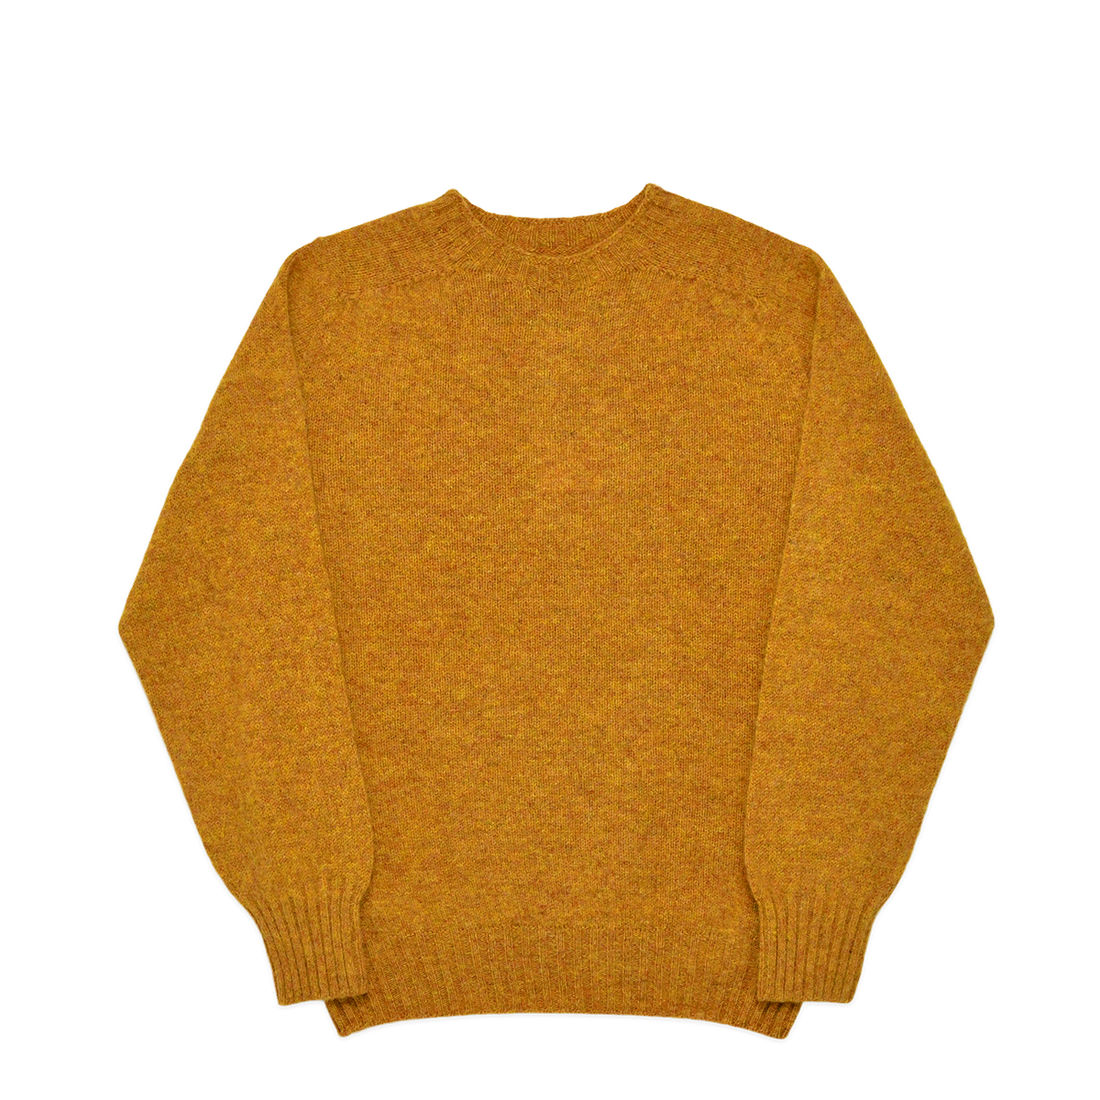 HOWLIN - SWEATER - BIRTH OF THE COOL - GOLD